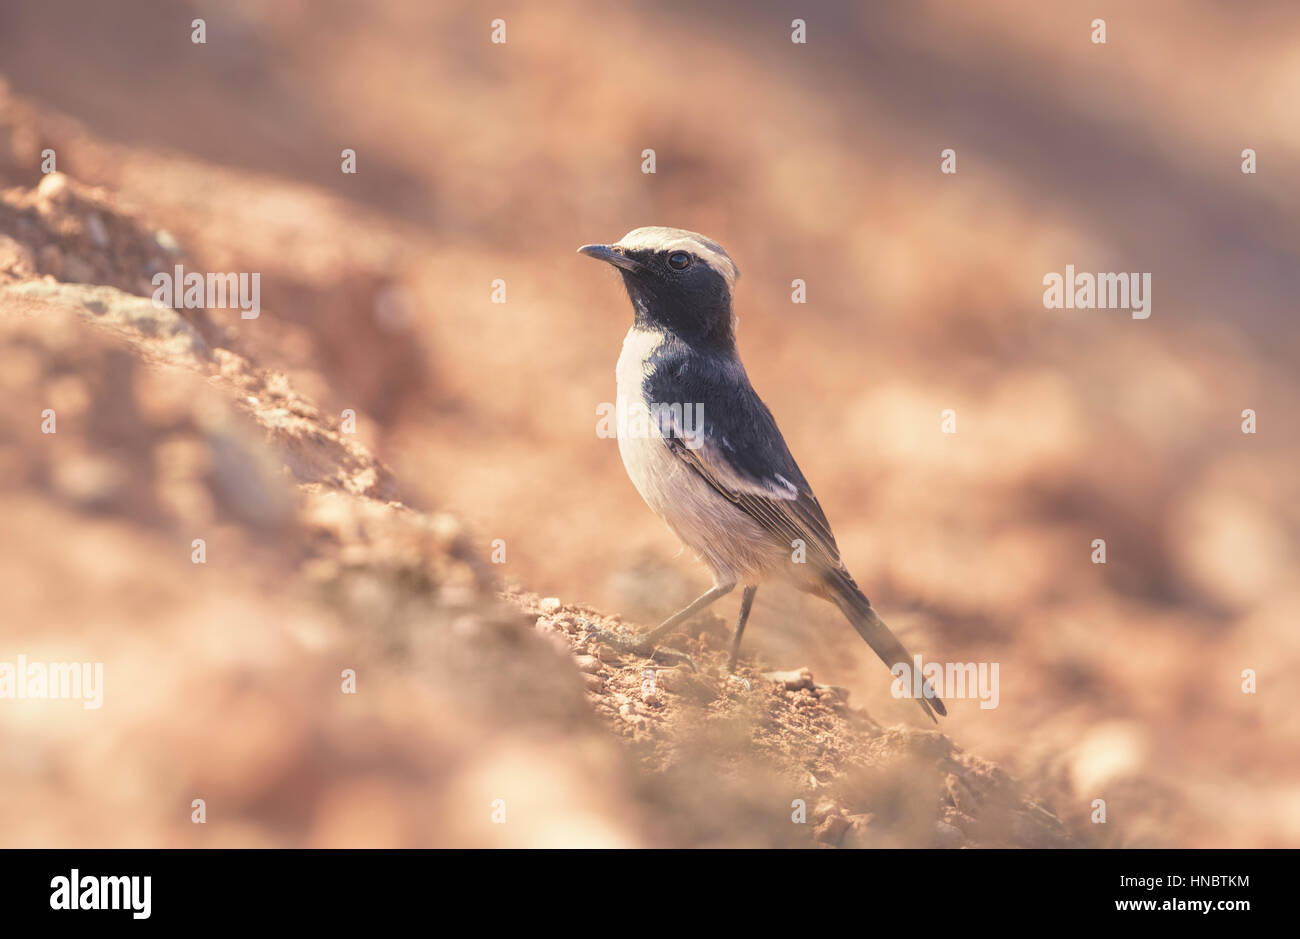 Maghreb wheatear bird (Oenanthe lugens), Morocco Stock Photo